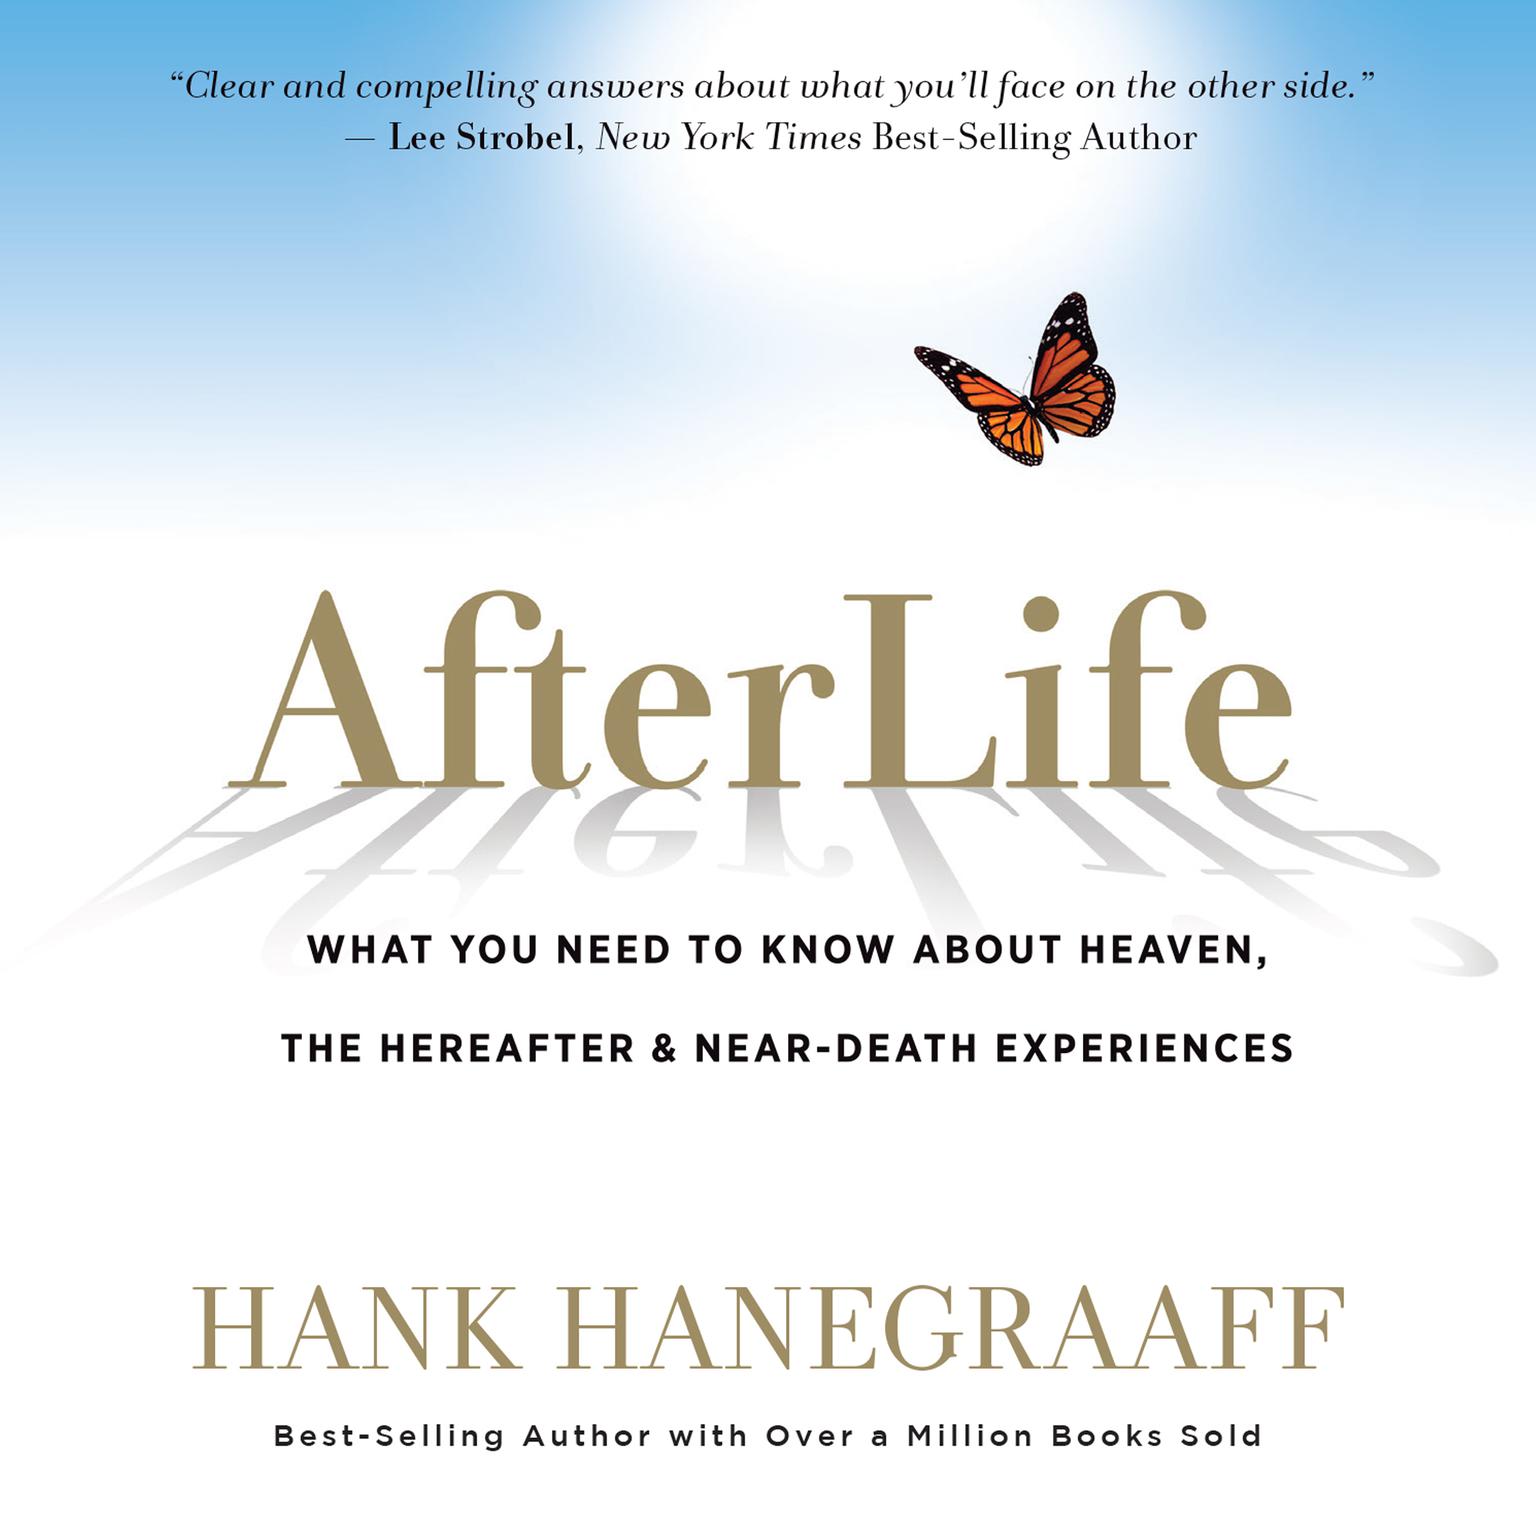 AfterLife: What You Really Want to Know About Heaven and the Hereafter Audiobook, by Hank Hanegraaff